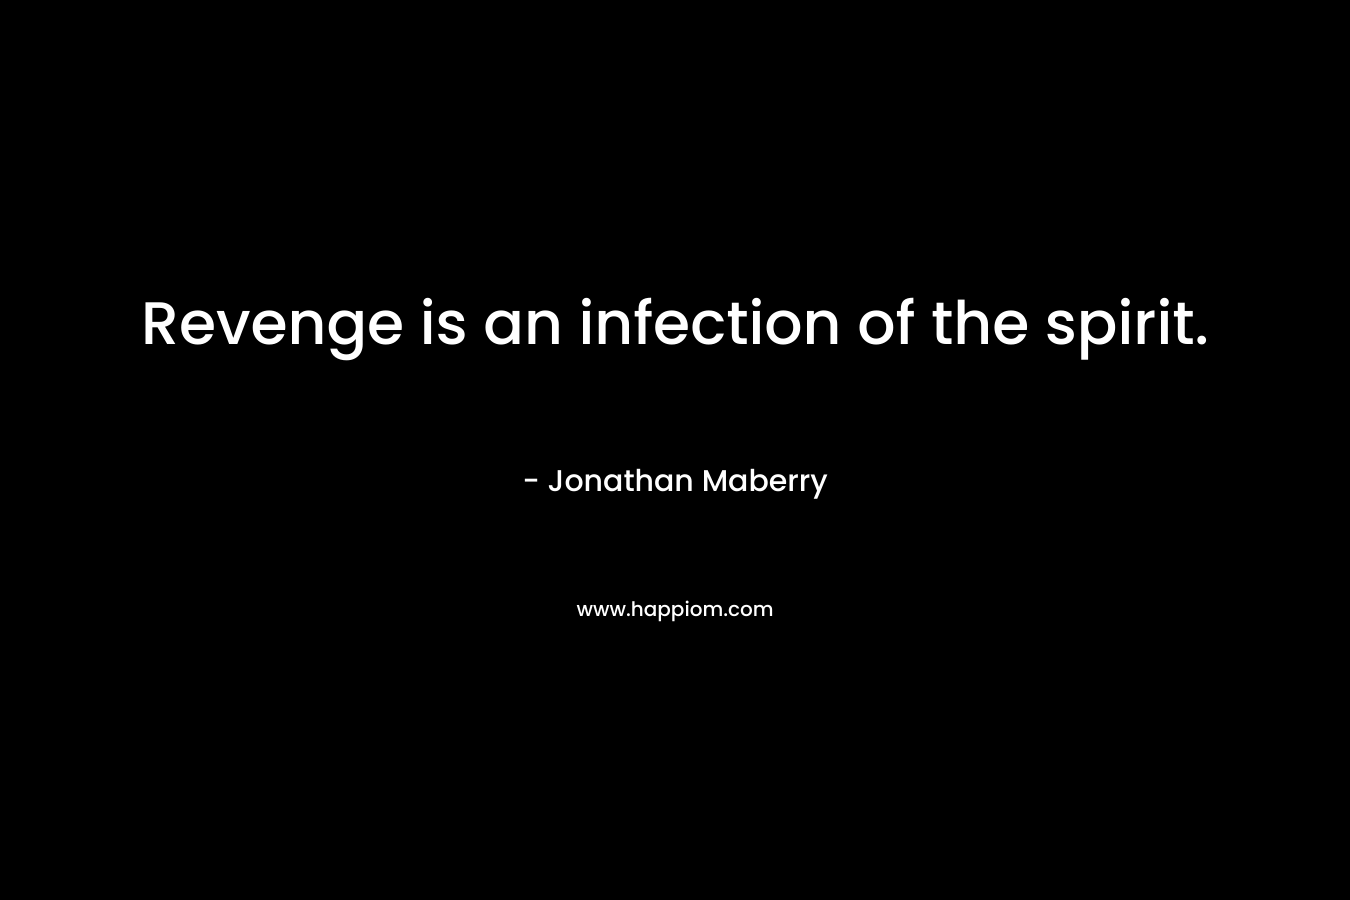 Revenge is an infection of the spirit. – Jonathan Maberry